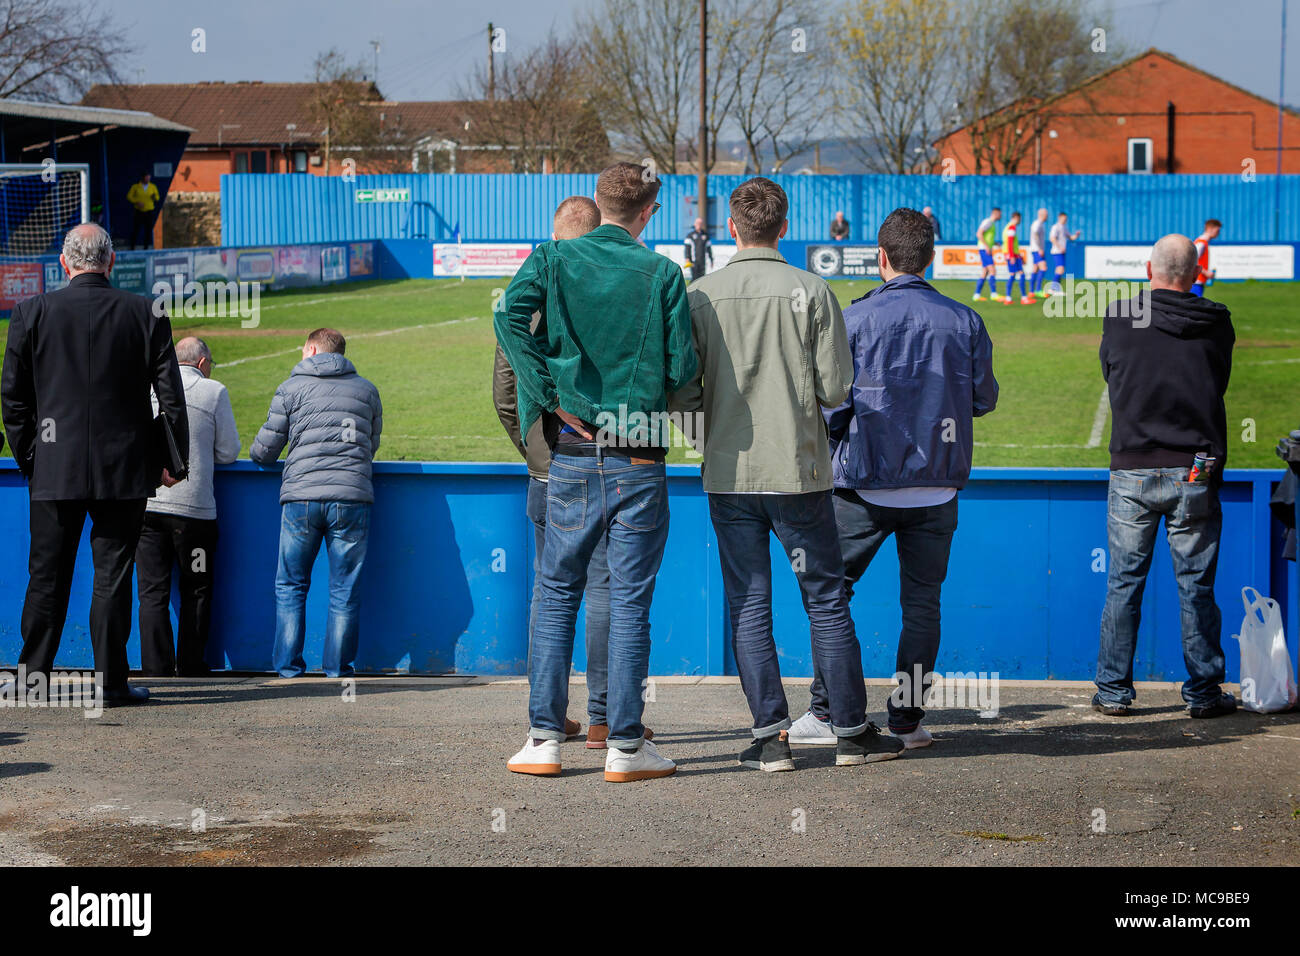 Warrington Town FC travelled to Throstle Nest, home of Farsley Celtic on 14 April 2018 to play in a top of the table clash. Supporters around the grou Stock Photo